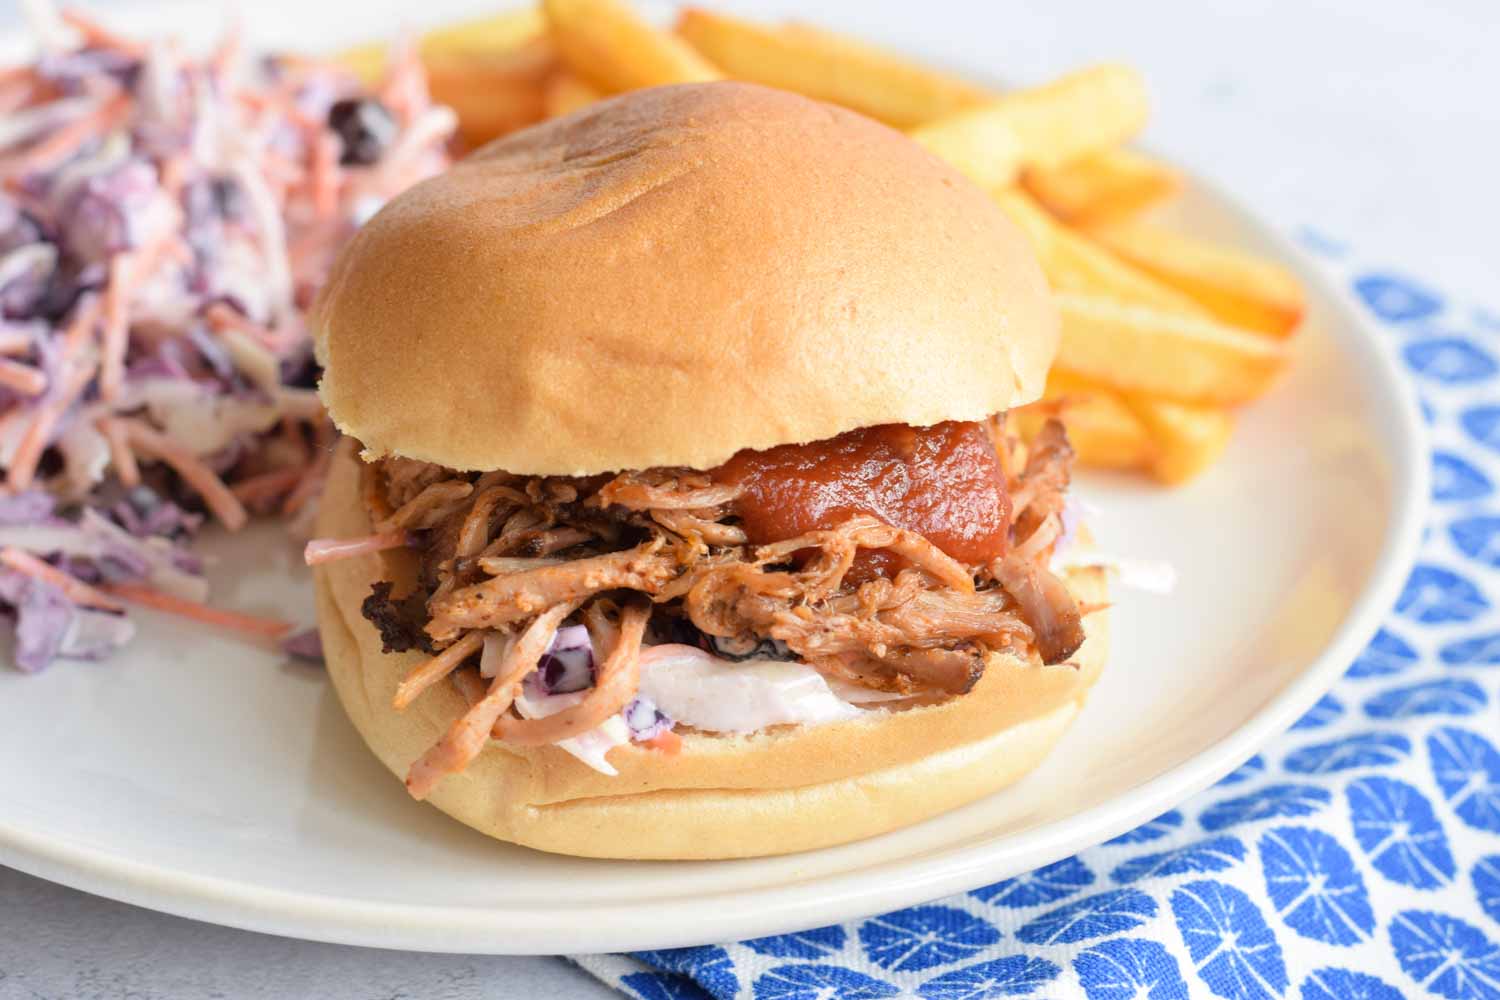 Low FODMAP pulled pork on a bun with coleslaw and fries